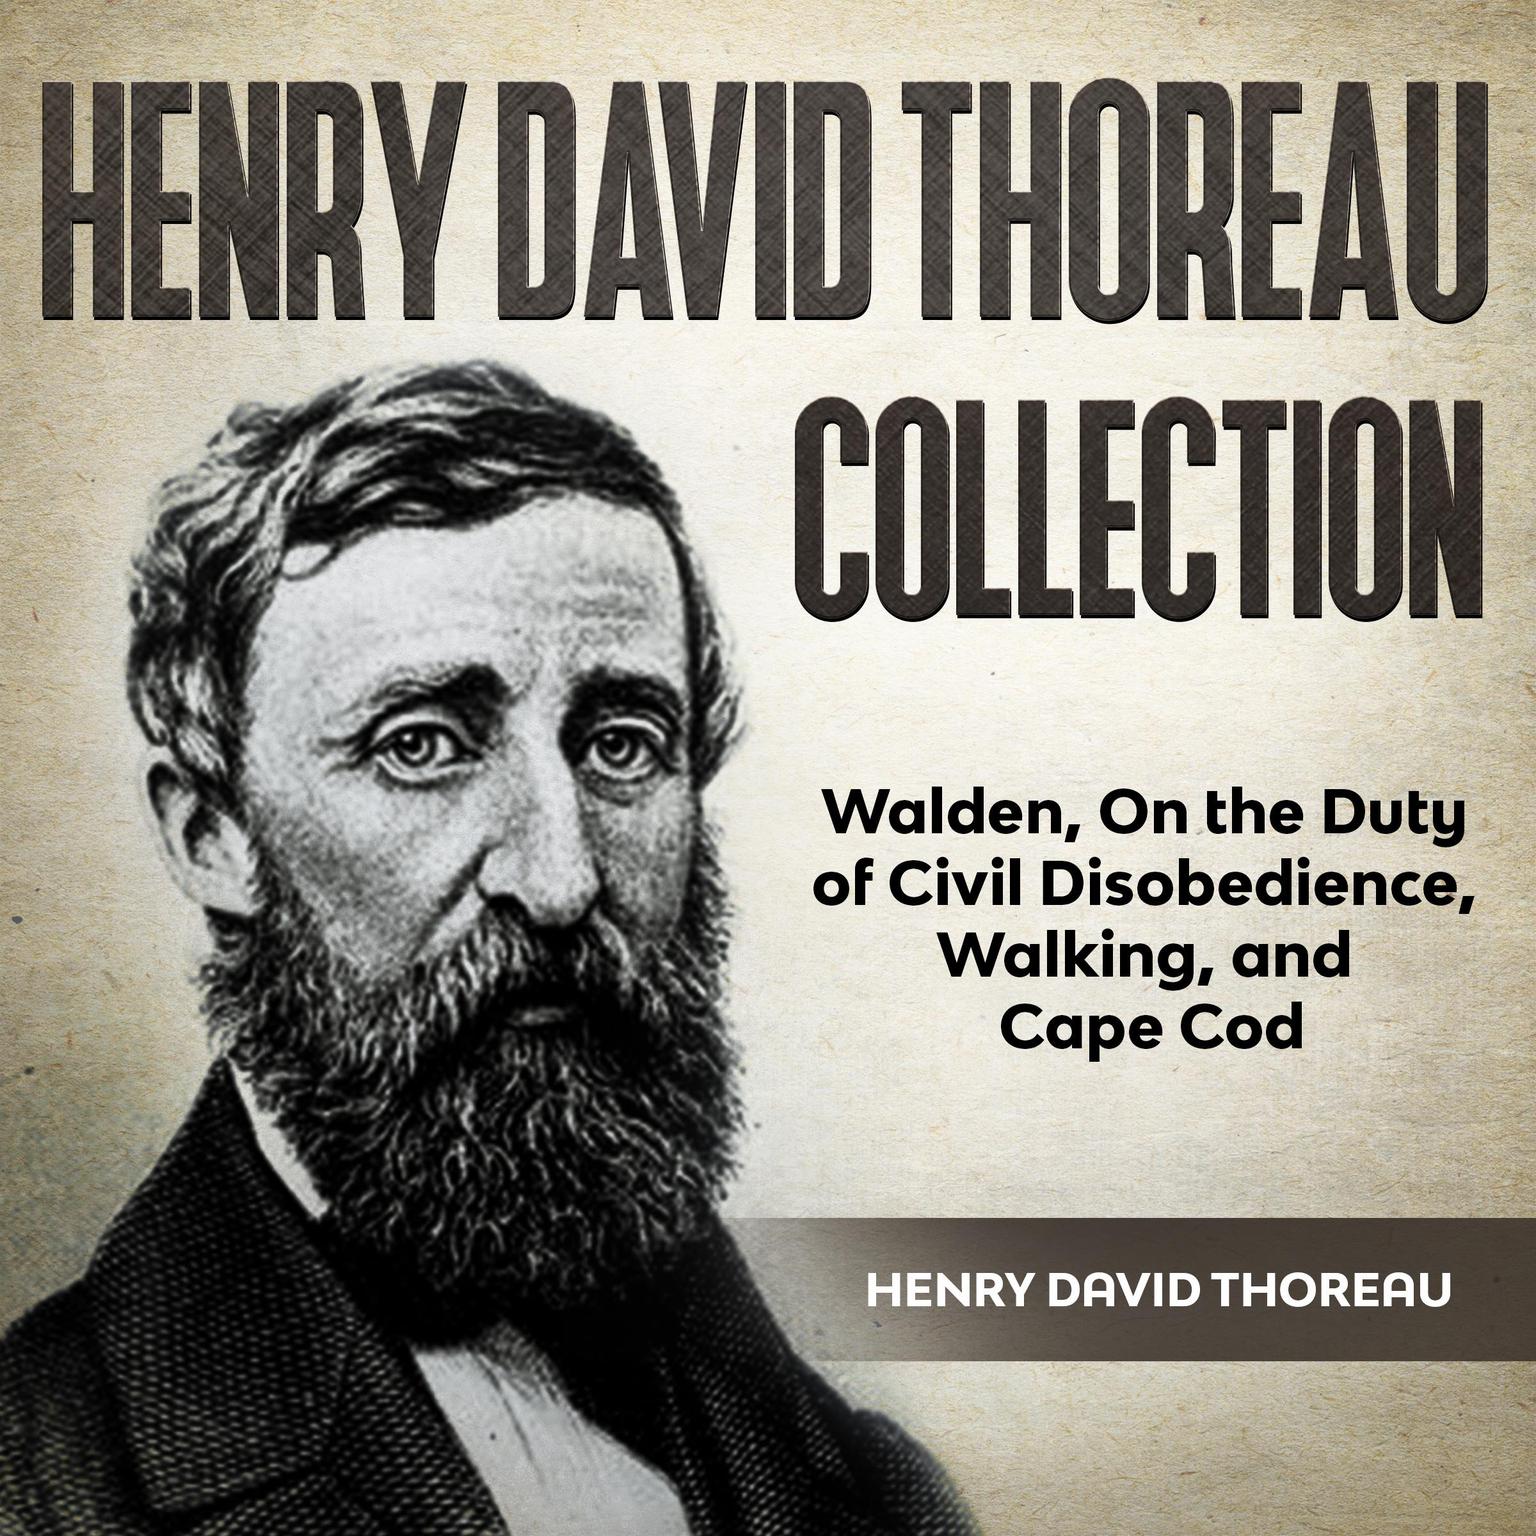 Henry David Thoreau Collection: Walden, On the Duty of Civil Disobedience, Walking and Cape Cod Audiobook, by Henry David Thoreau